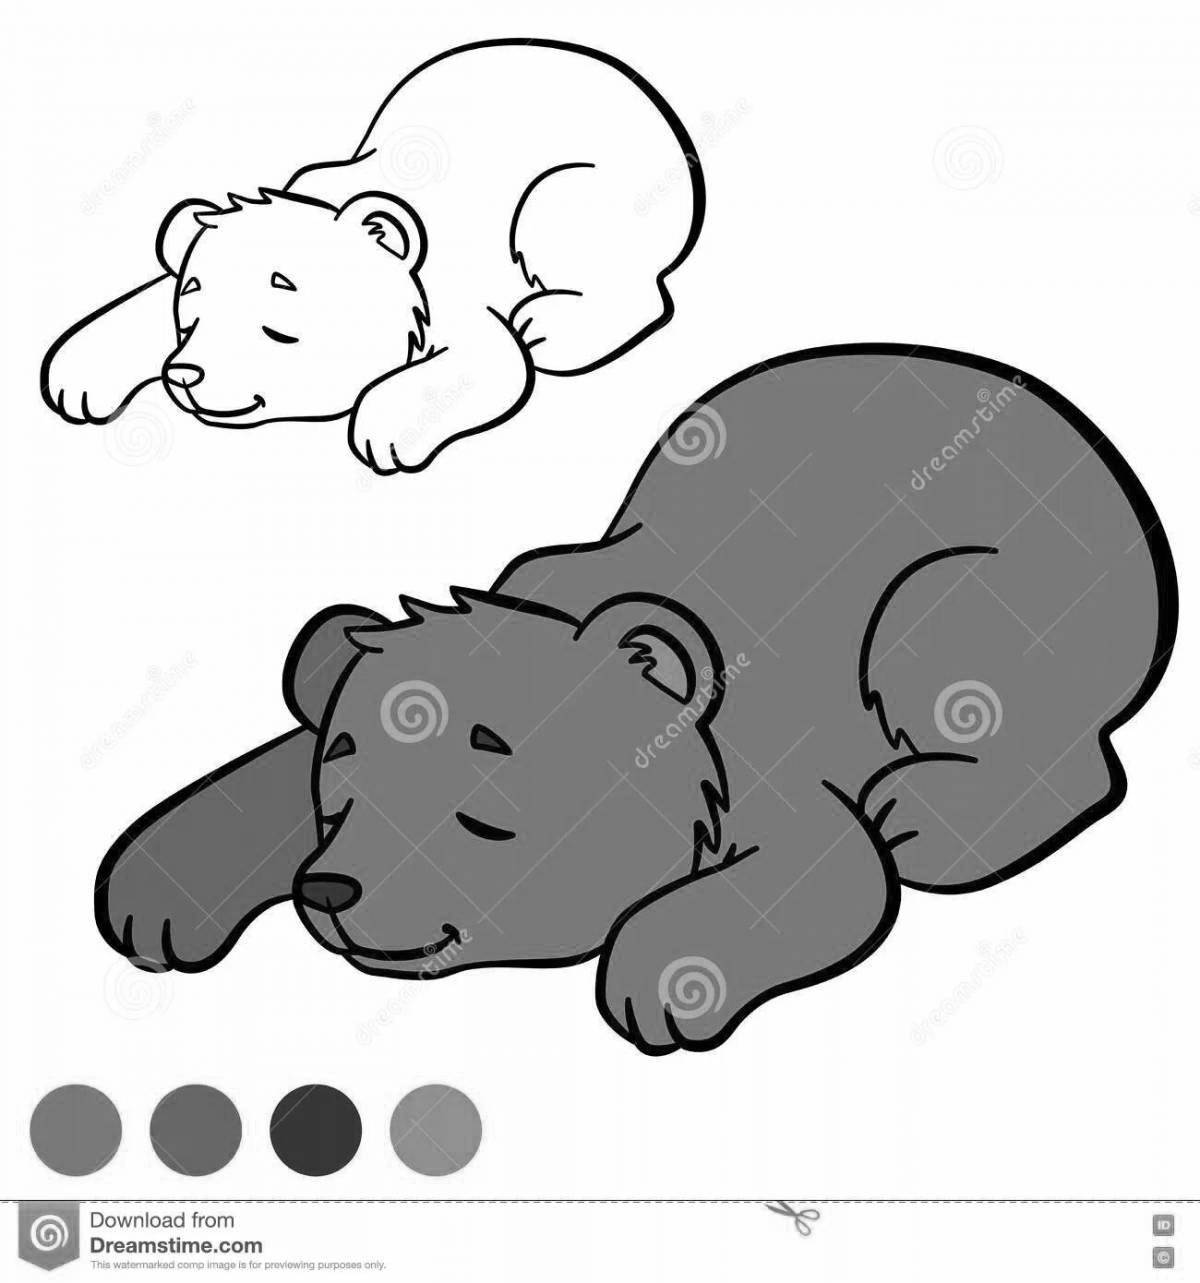 Wonderful bear in a den coloring book for children